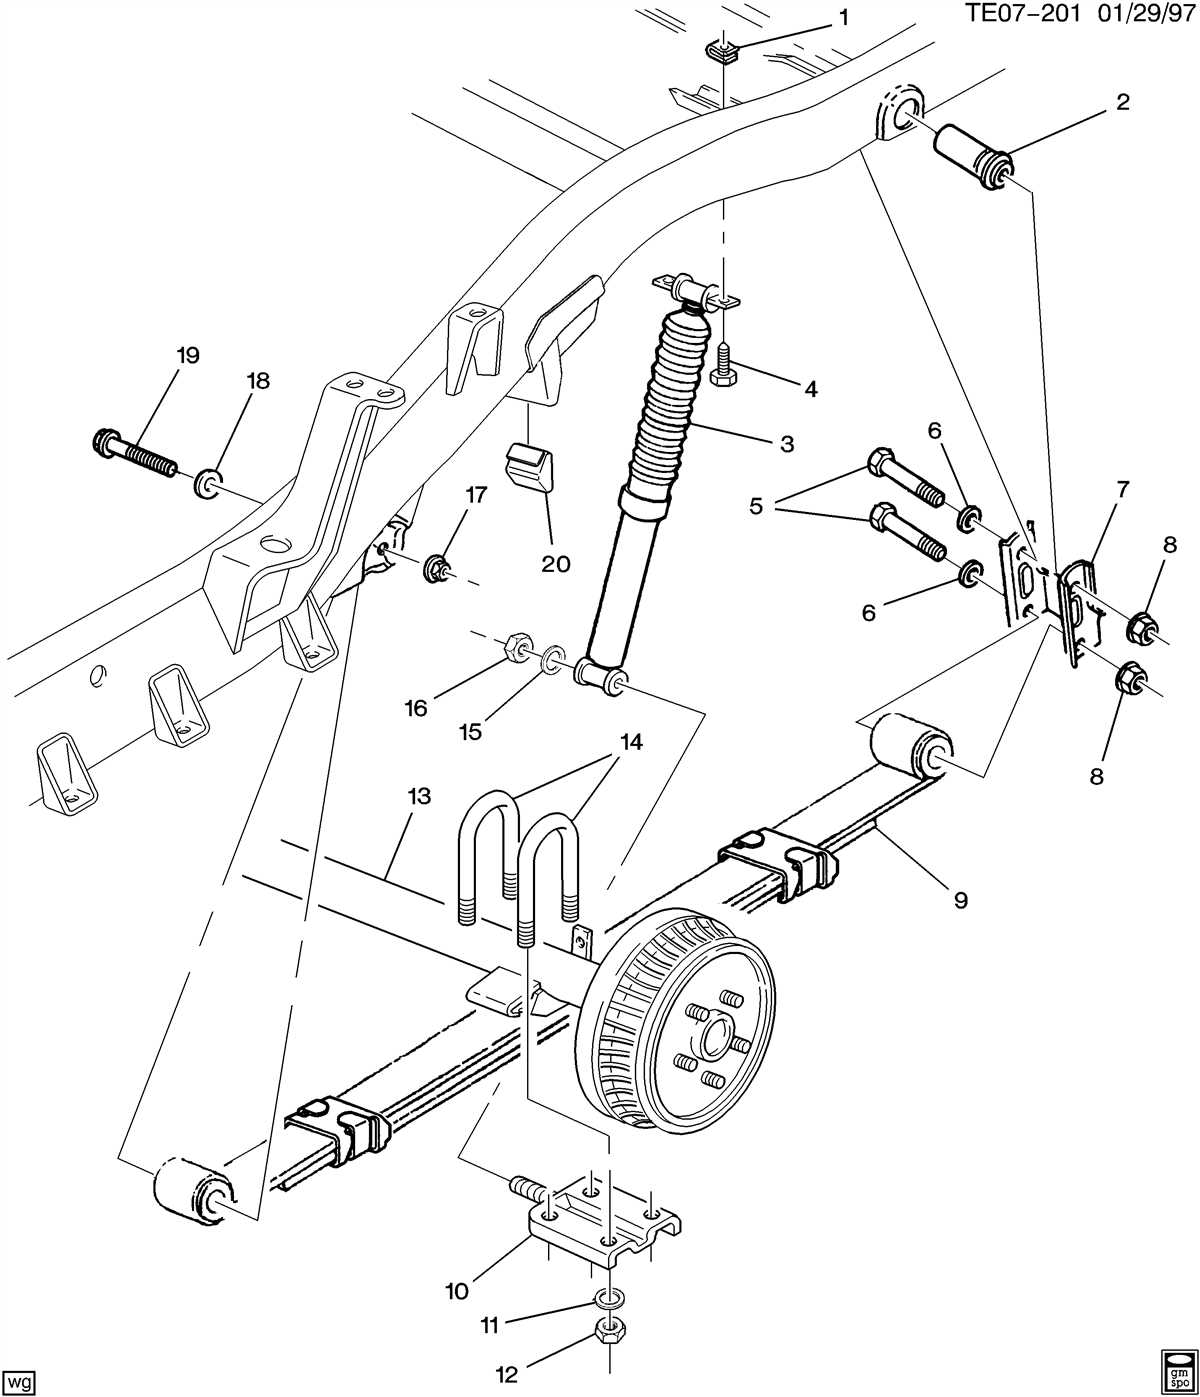 Overview of the Front Suspension System